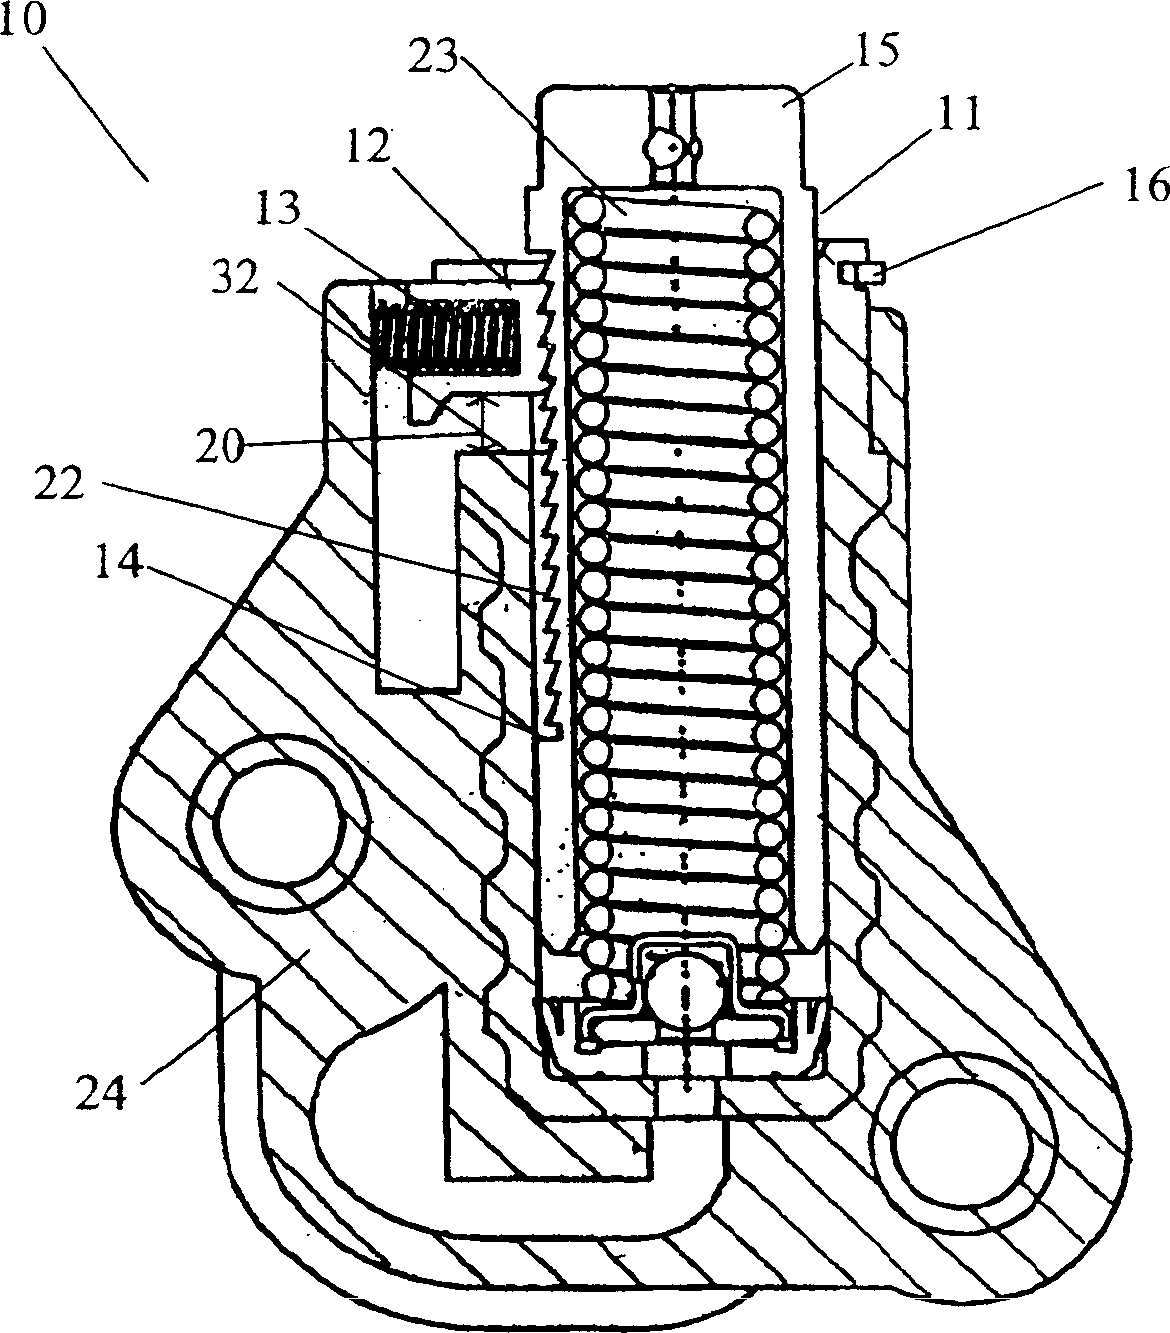 Tooth hydraulic chain tensioner with rotary reset and locking means